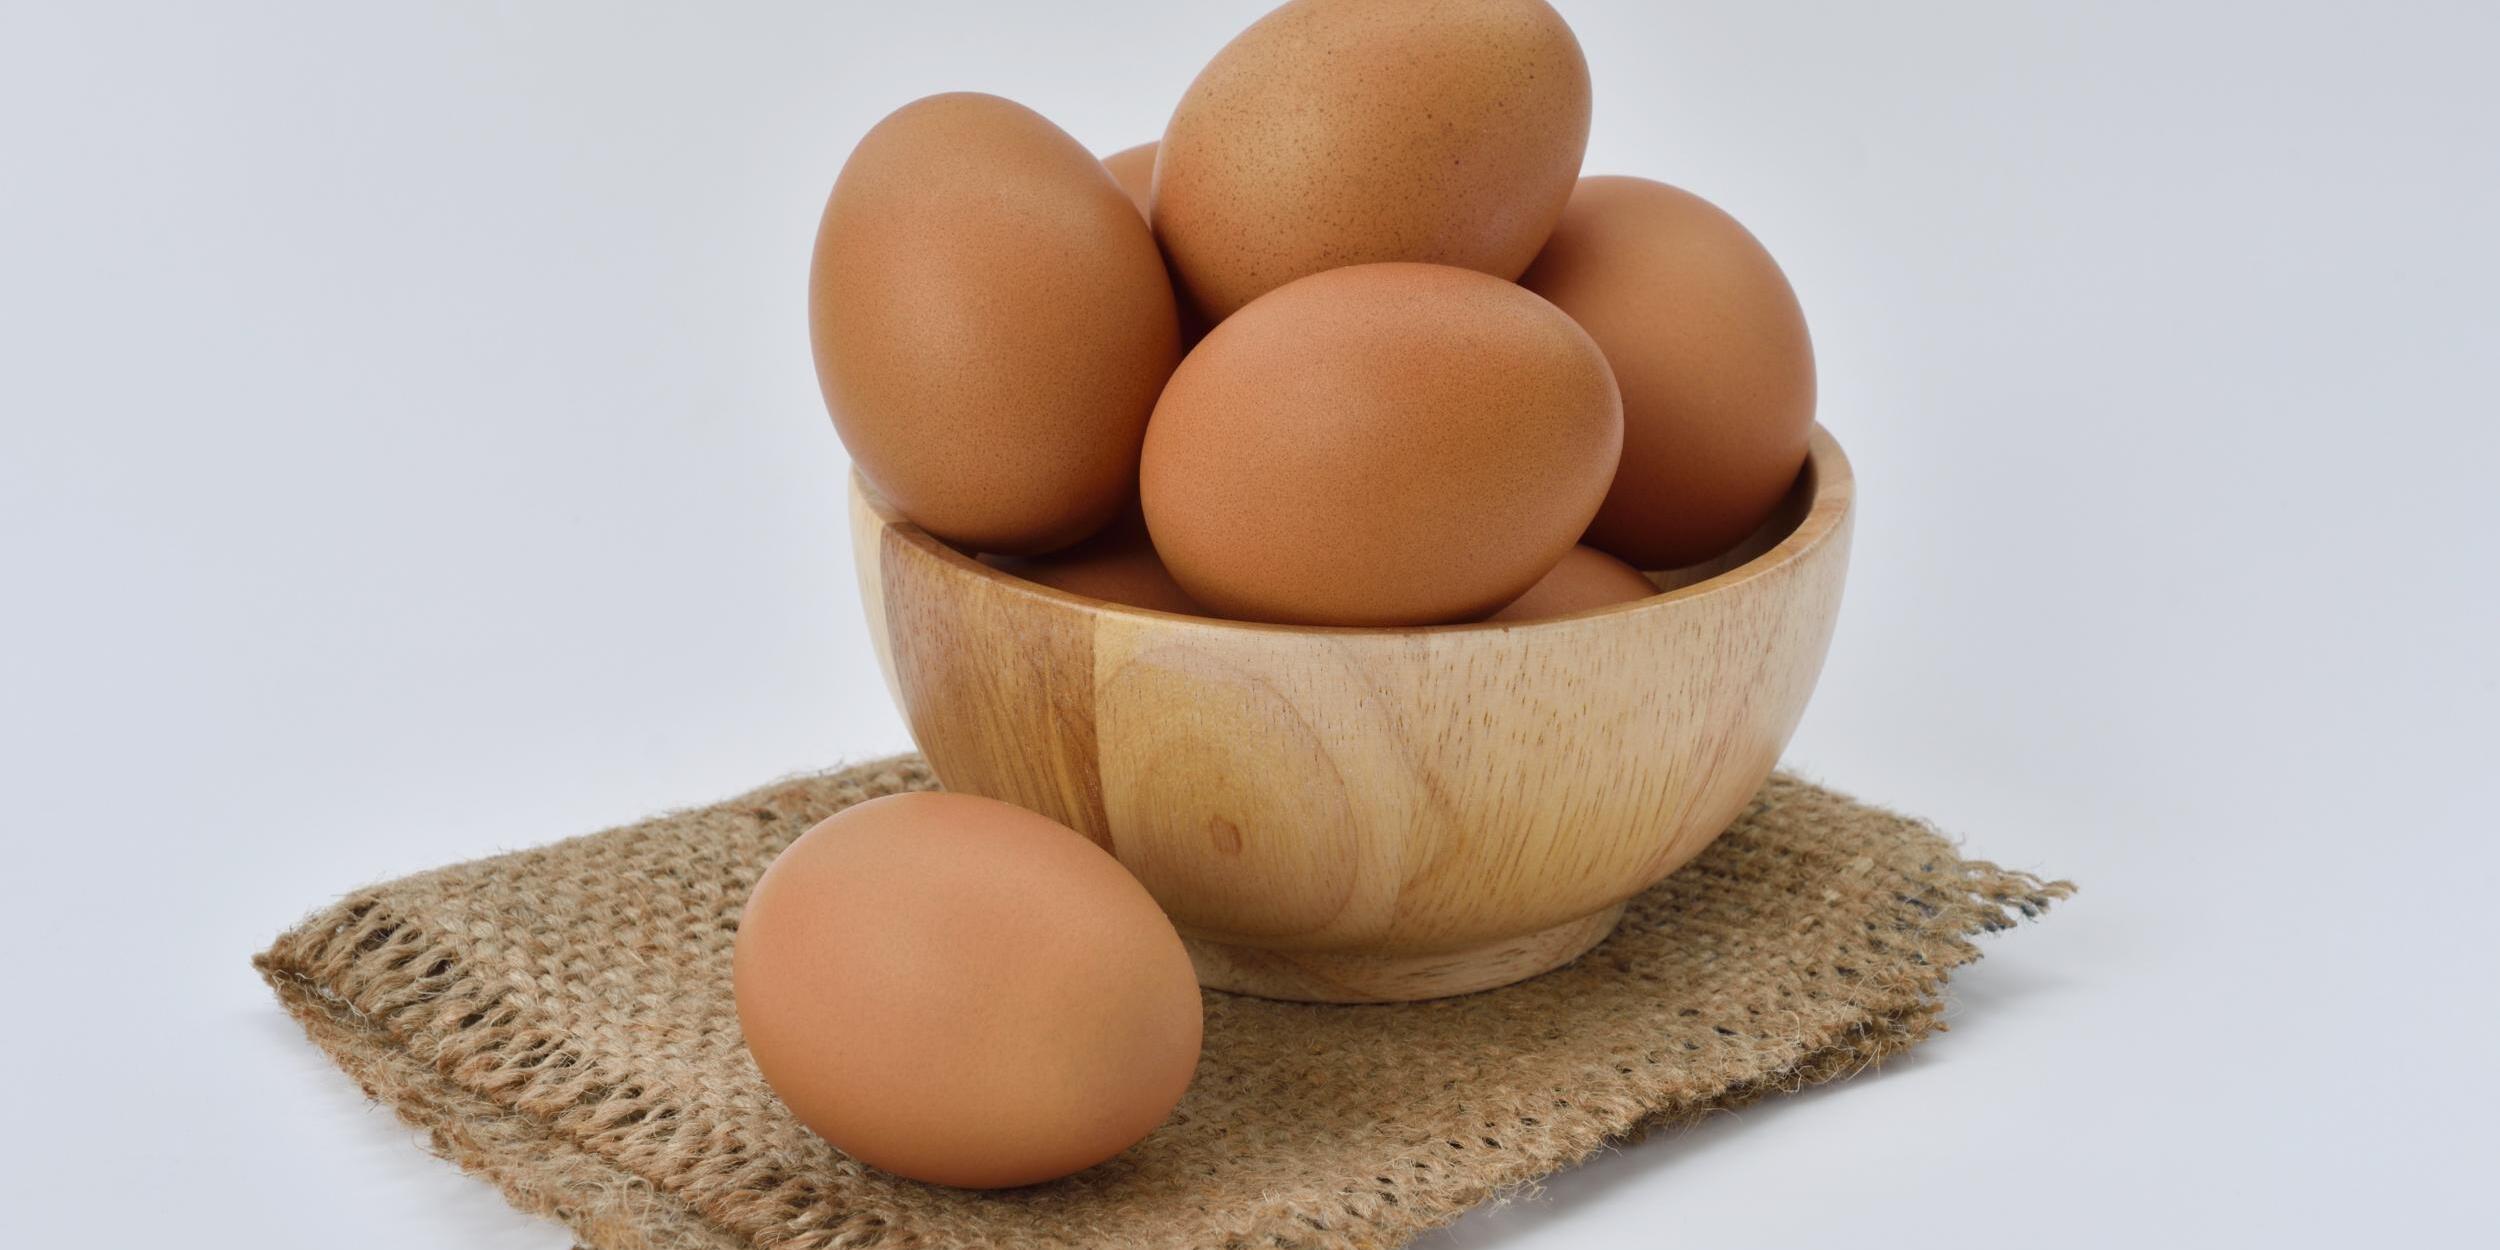 brown-eggs-on-brown-wooden-bowl-on-beige-knit-textile-162712